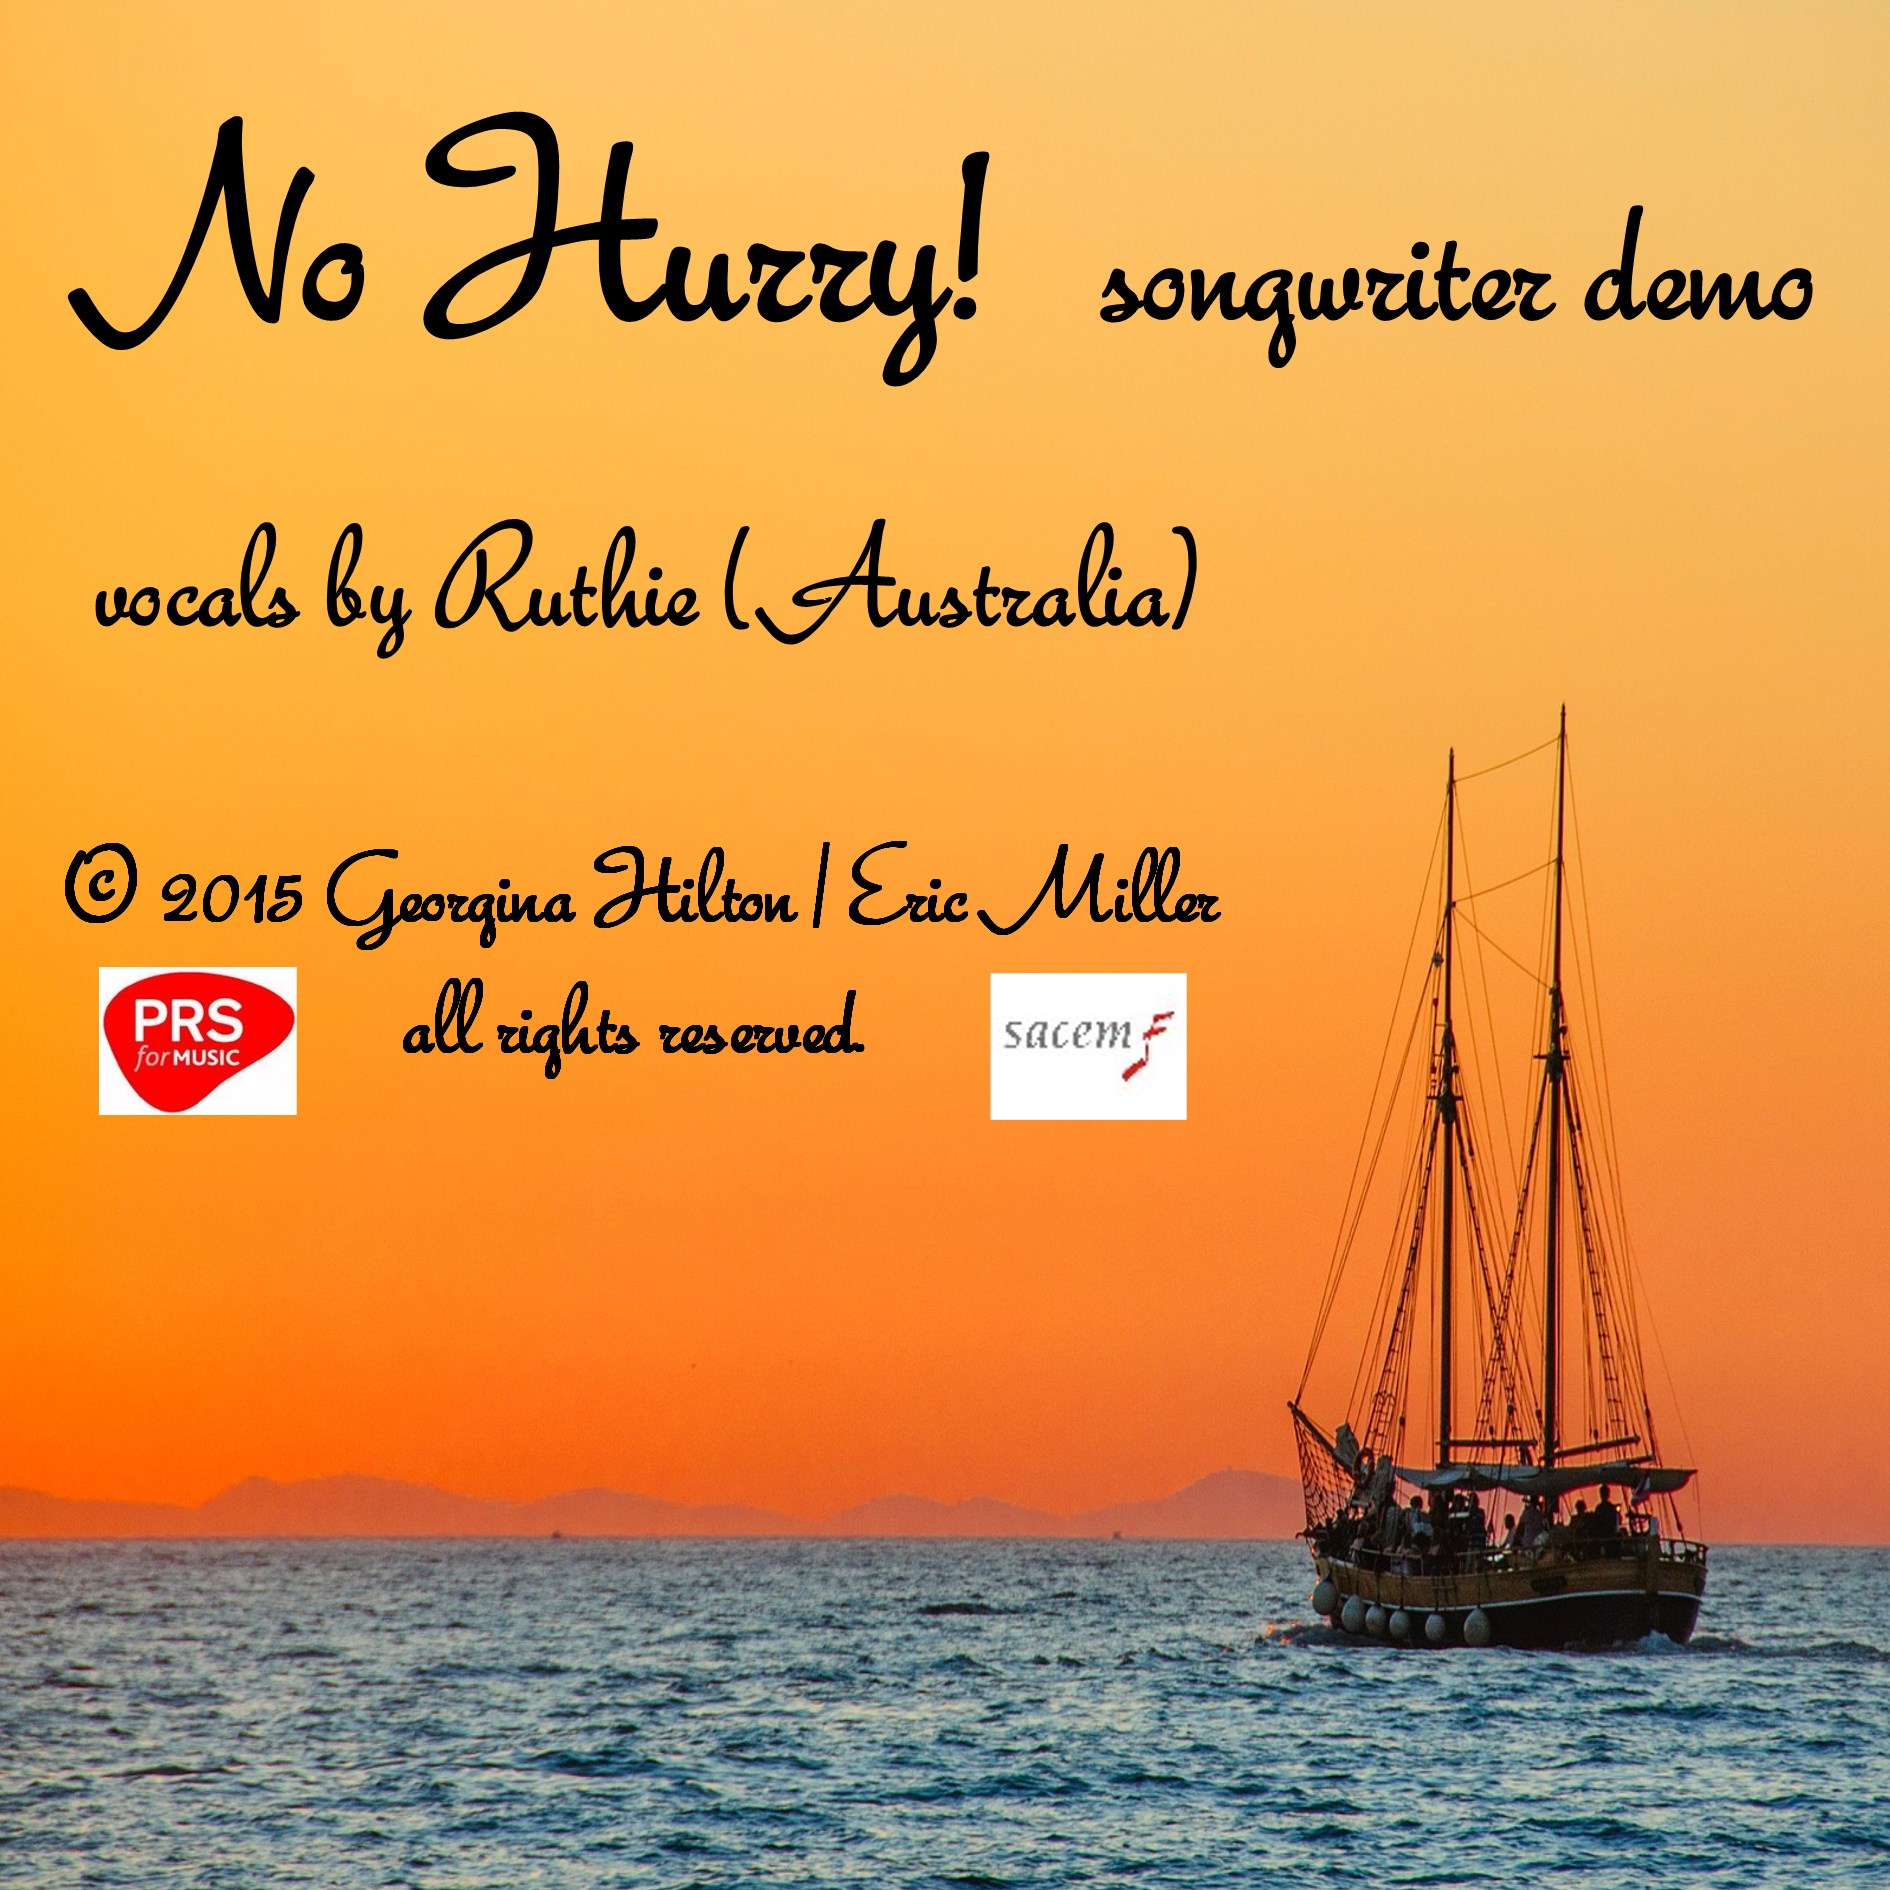 'No Hurry!'  new folk / country songwriter demo with vocals by Ruthie (Australia)